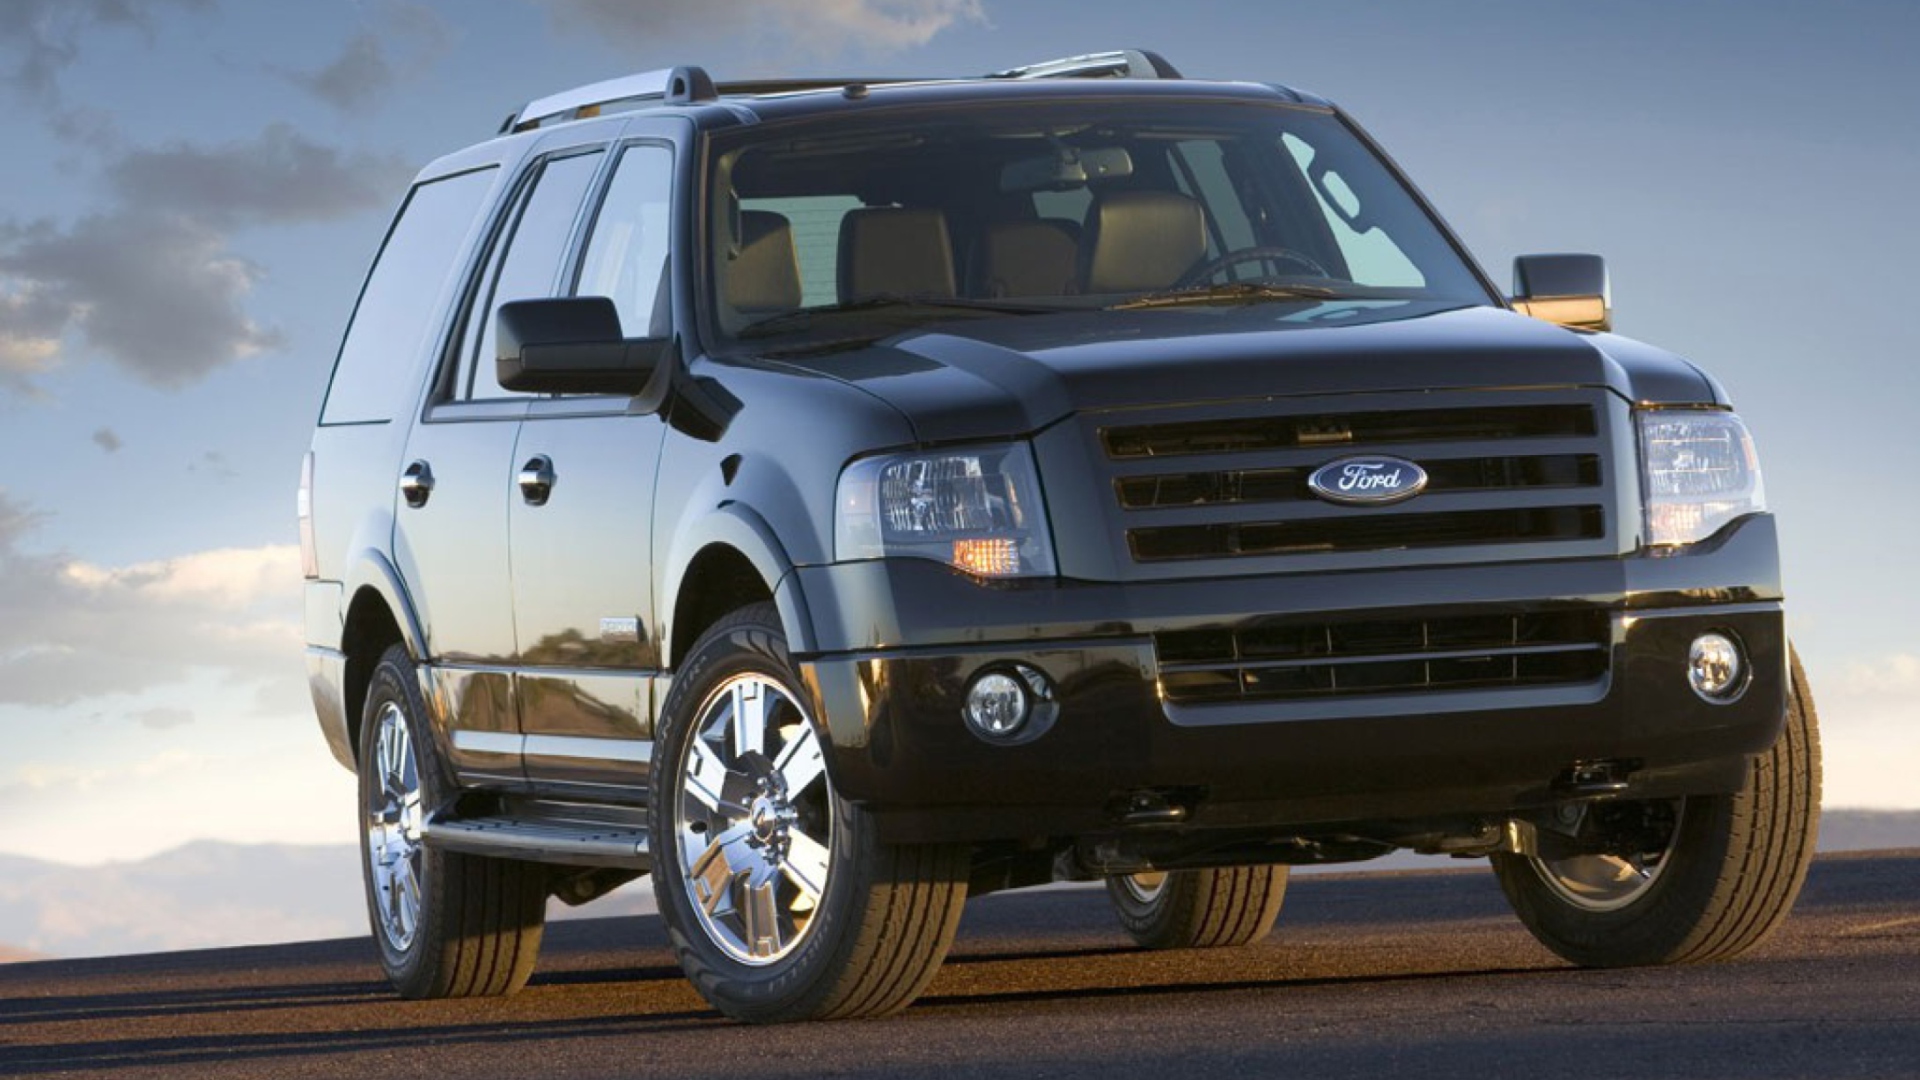 Das Ford Expedition Wallpaper 1920x1080